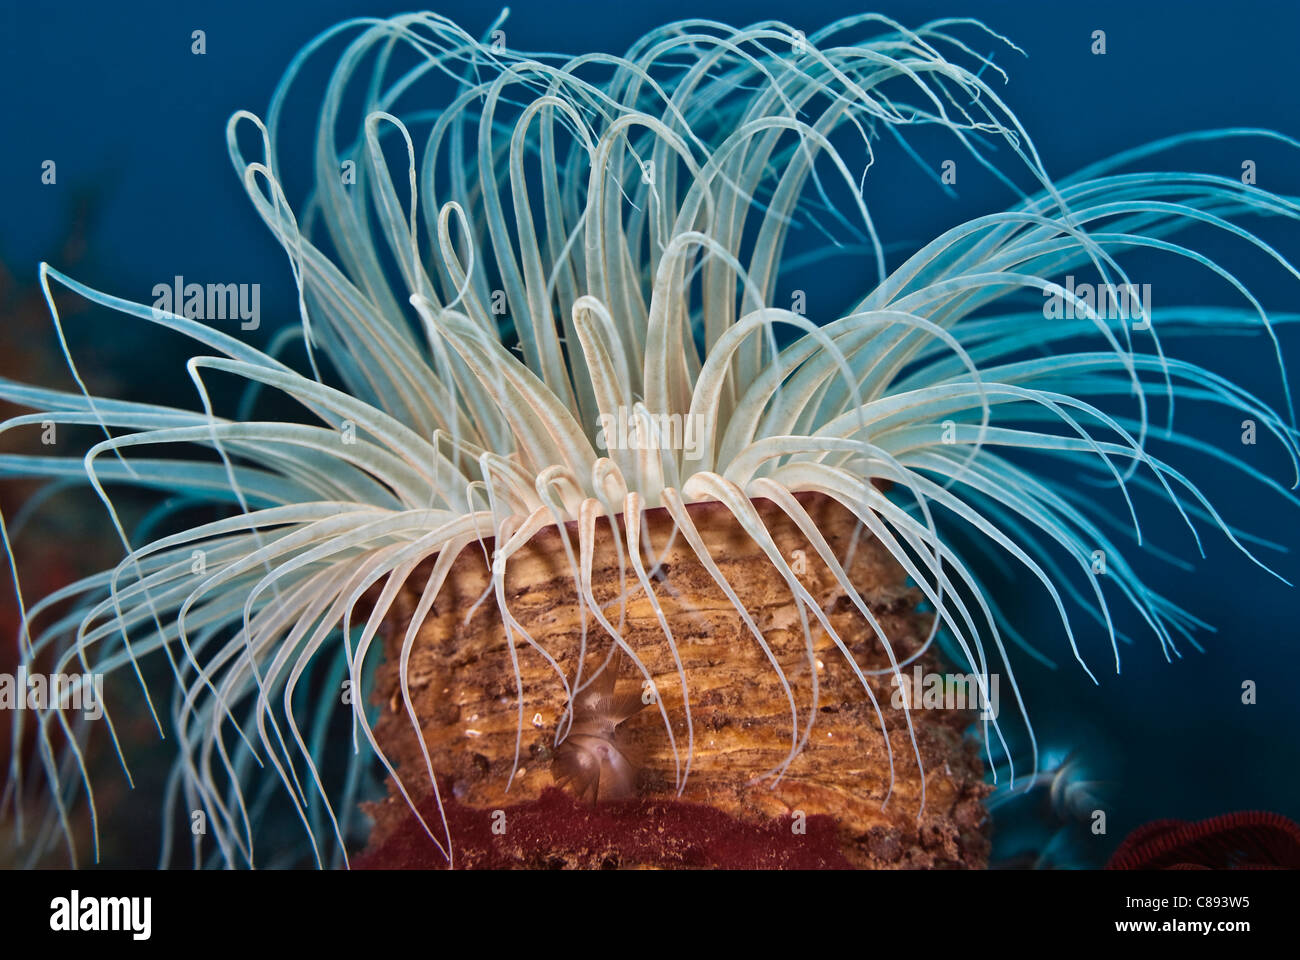 Tube Anemone with white tentacle streamers against a blue background under water. Stock Photo